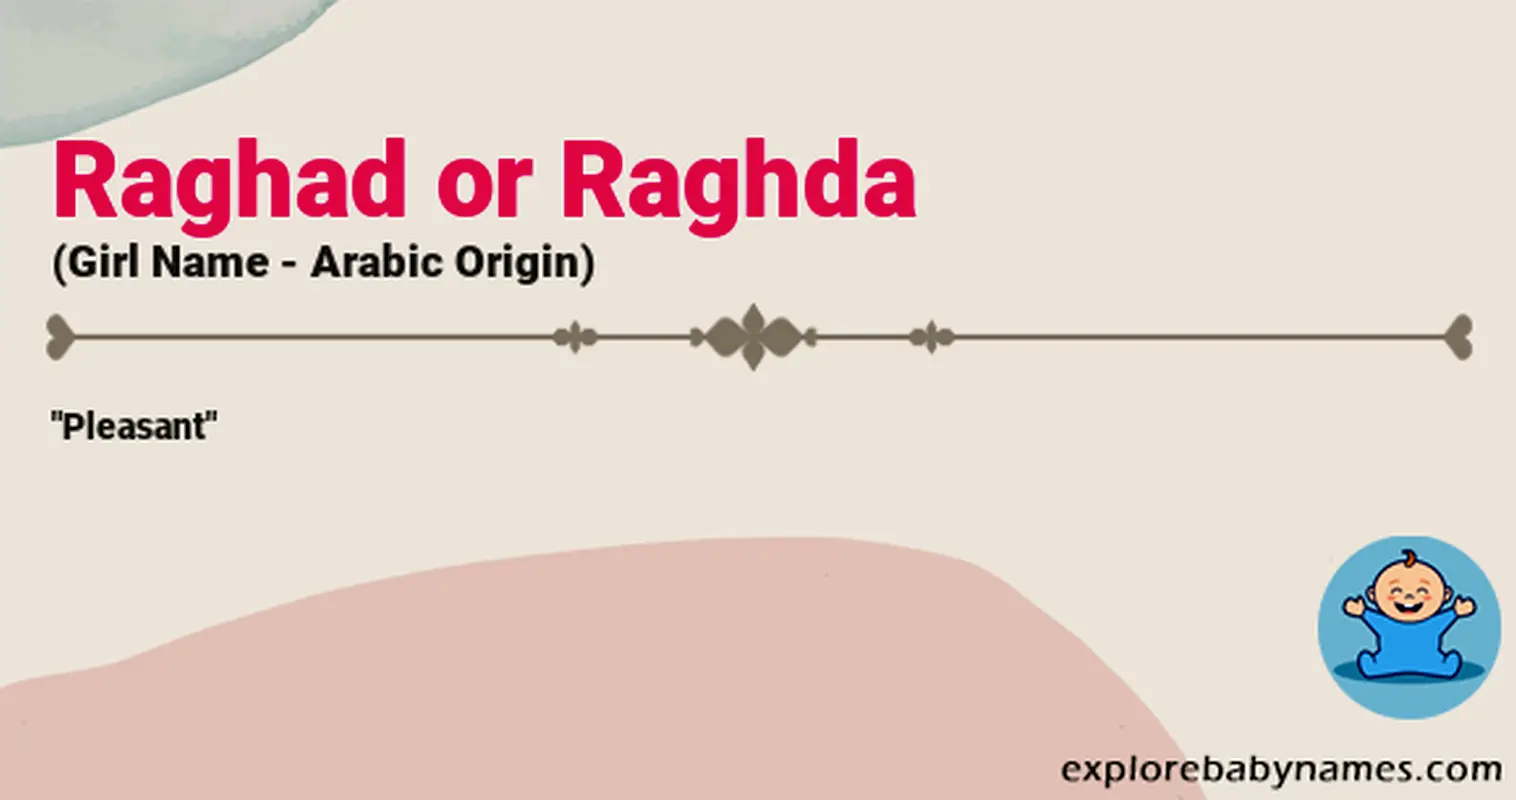 Meaning of Raghad or Raghda